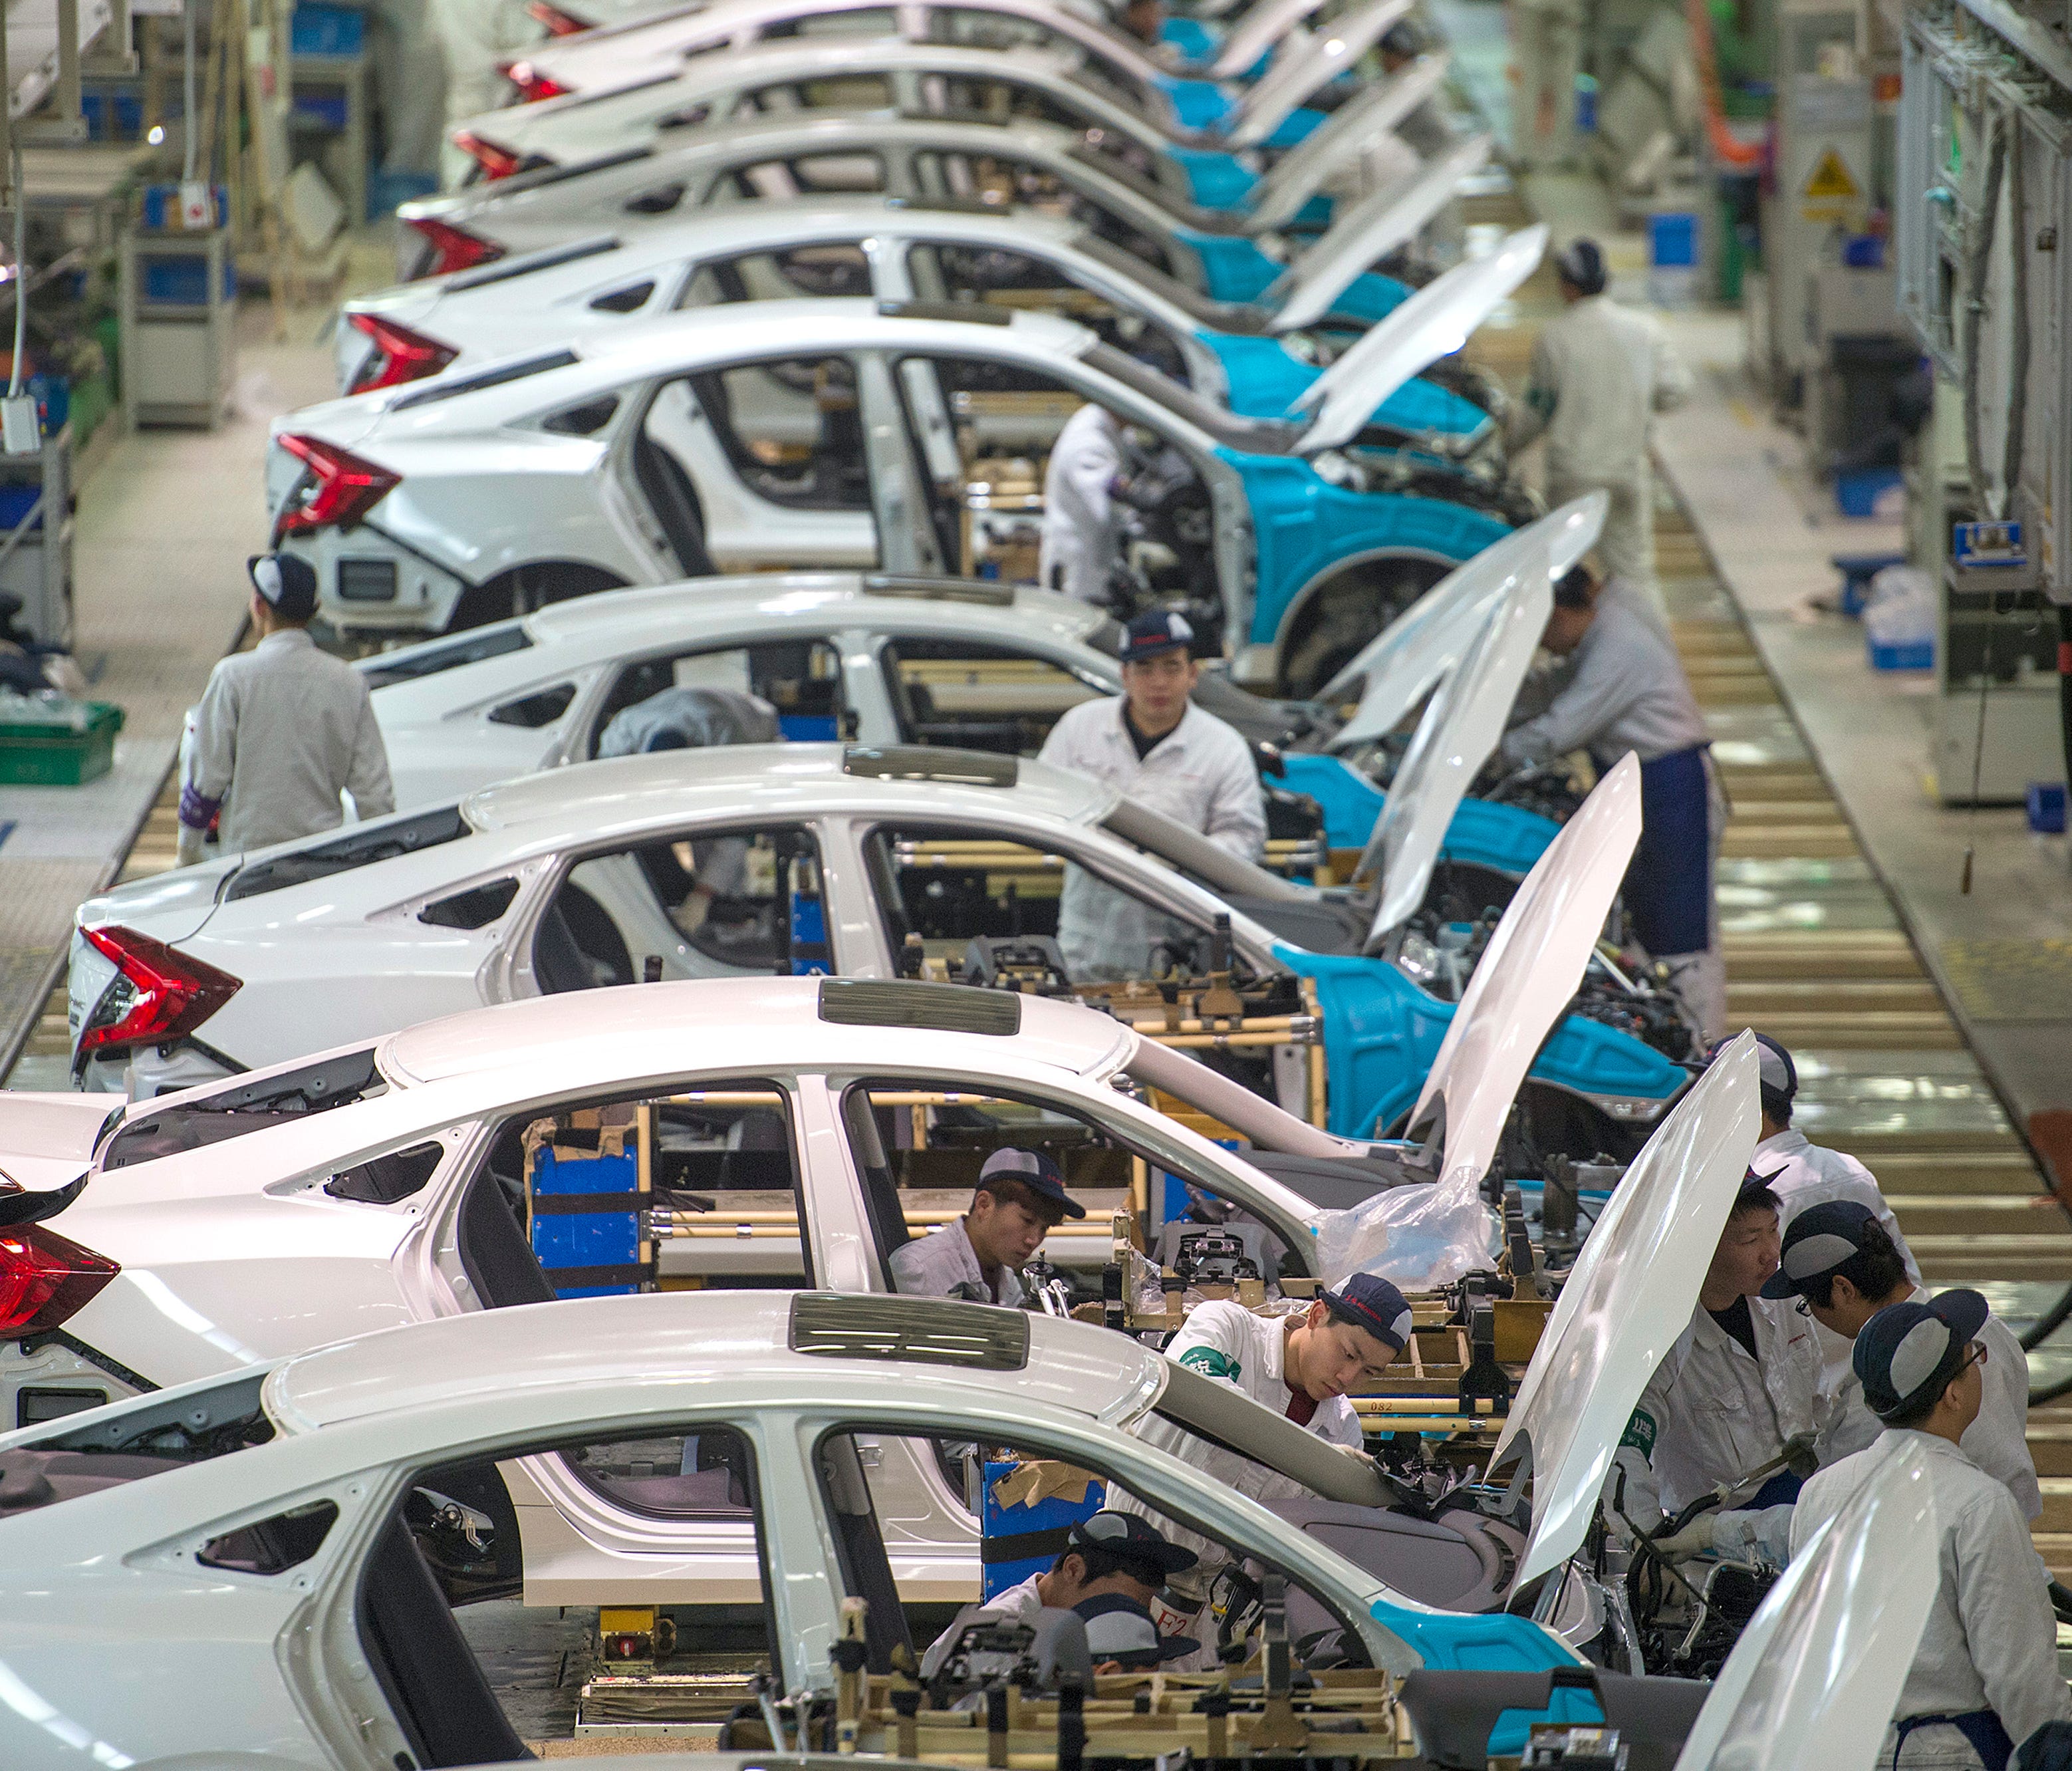 Workers assemble Honda Civics on an assembly line at a Dongfeng Honda automotive plant in Wuhan in central China's Hubei province. China's economy expanded at a 6.9 percent pace in 2017, faster than expected and the first annual increase in seven yea